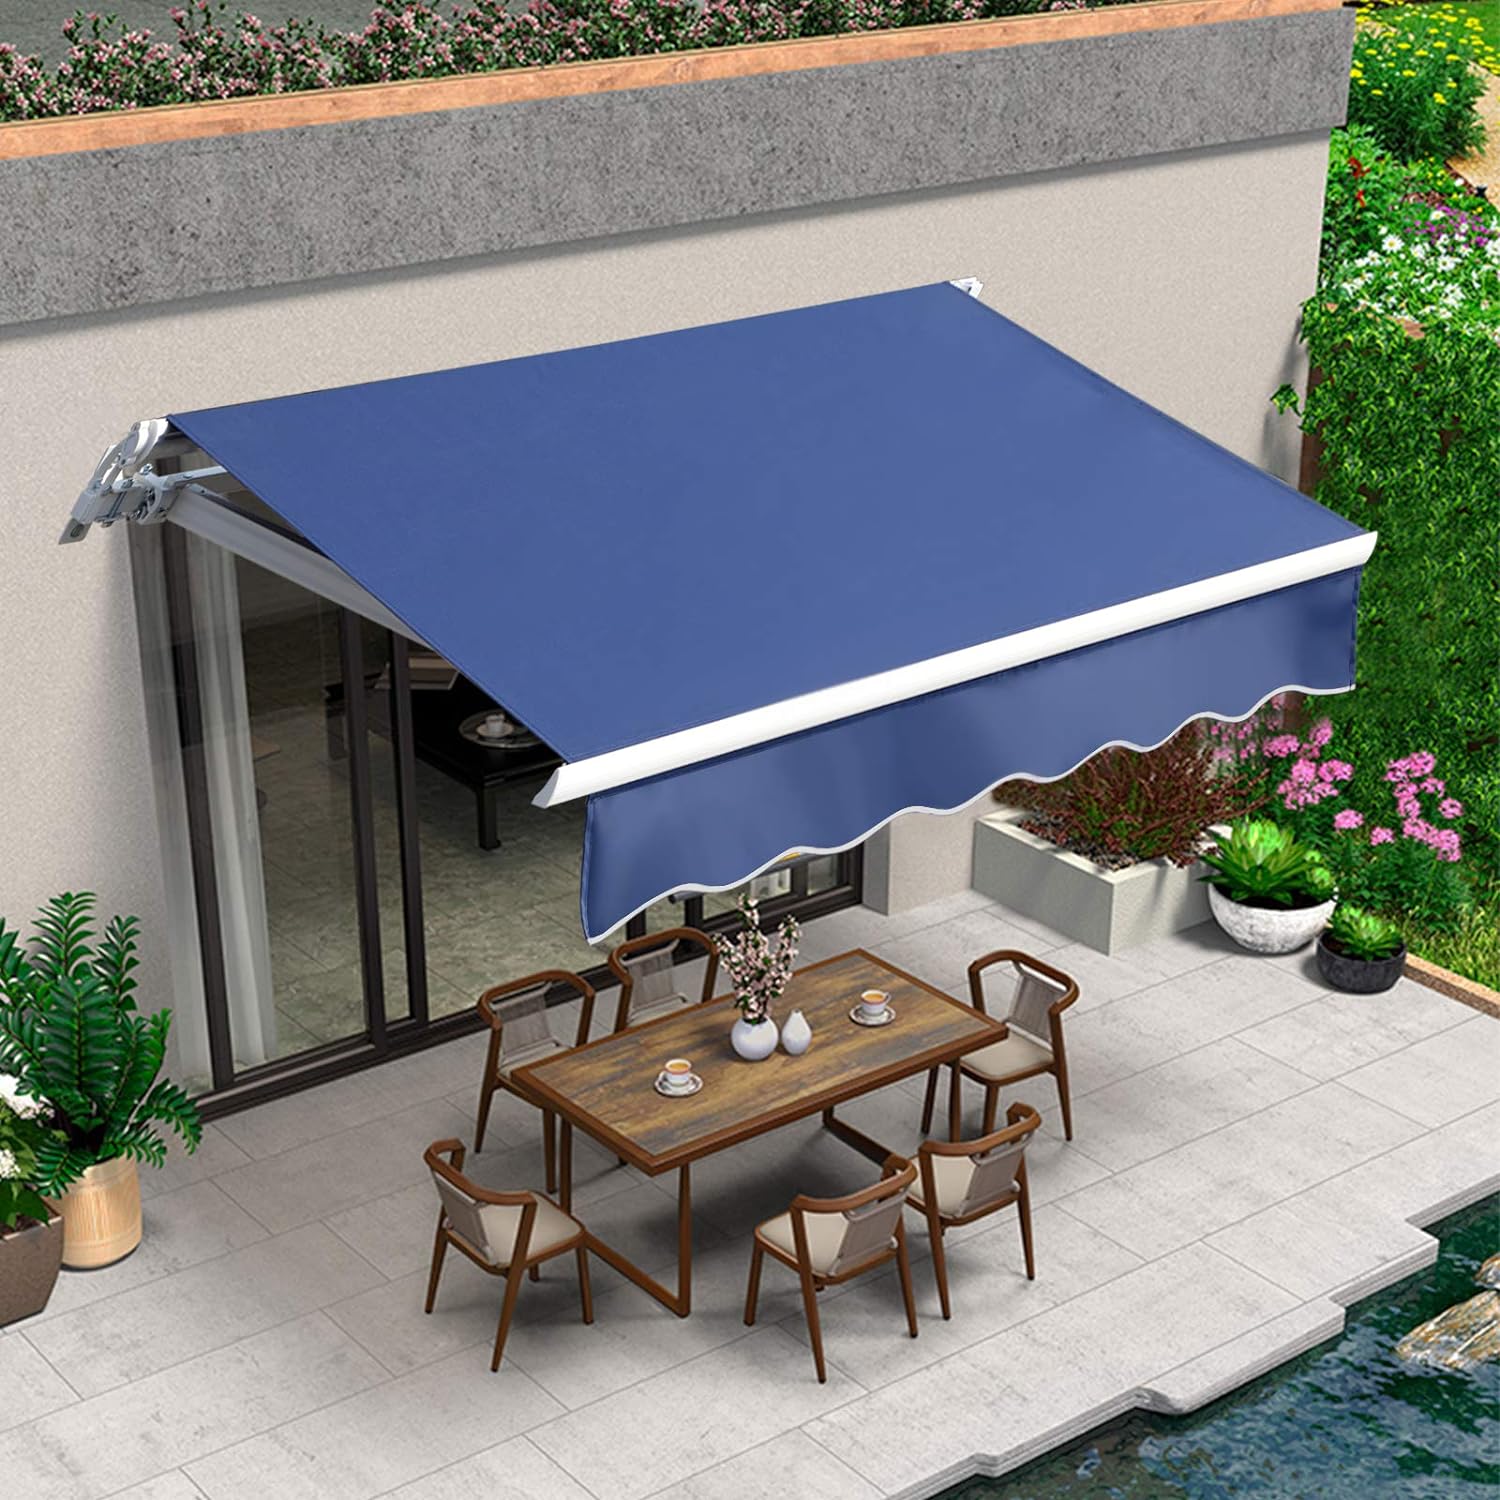 9.8'x8.2' Patio Awning Retractable Awning Cover Sunshade Shelter Outdoor Canopy with Crank Handle and Water-Resistant Polyester for Courtyard, Balcony, Shop, Restaurant, Cafe, Deck